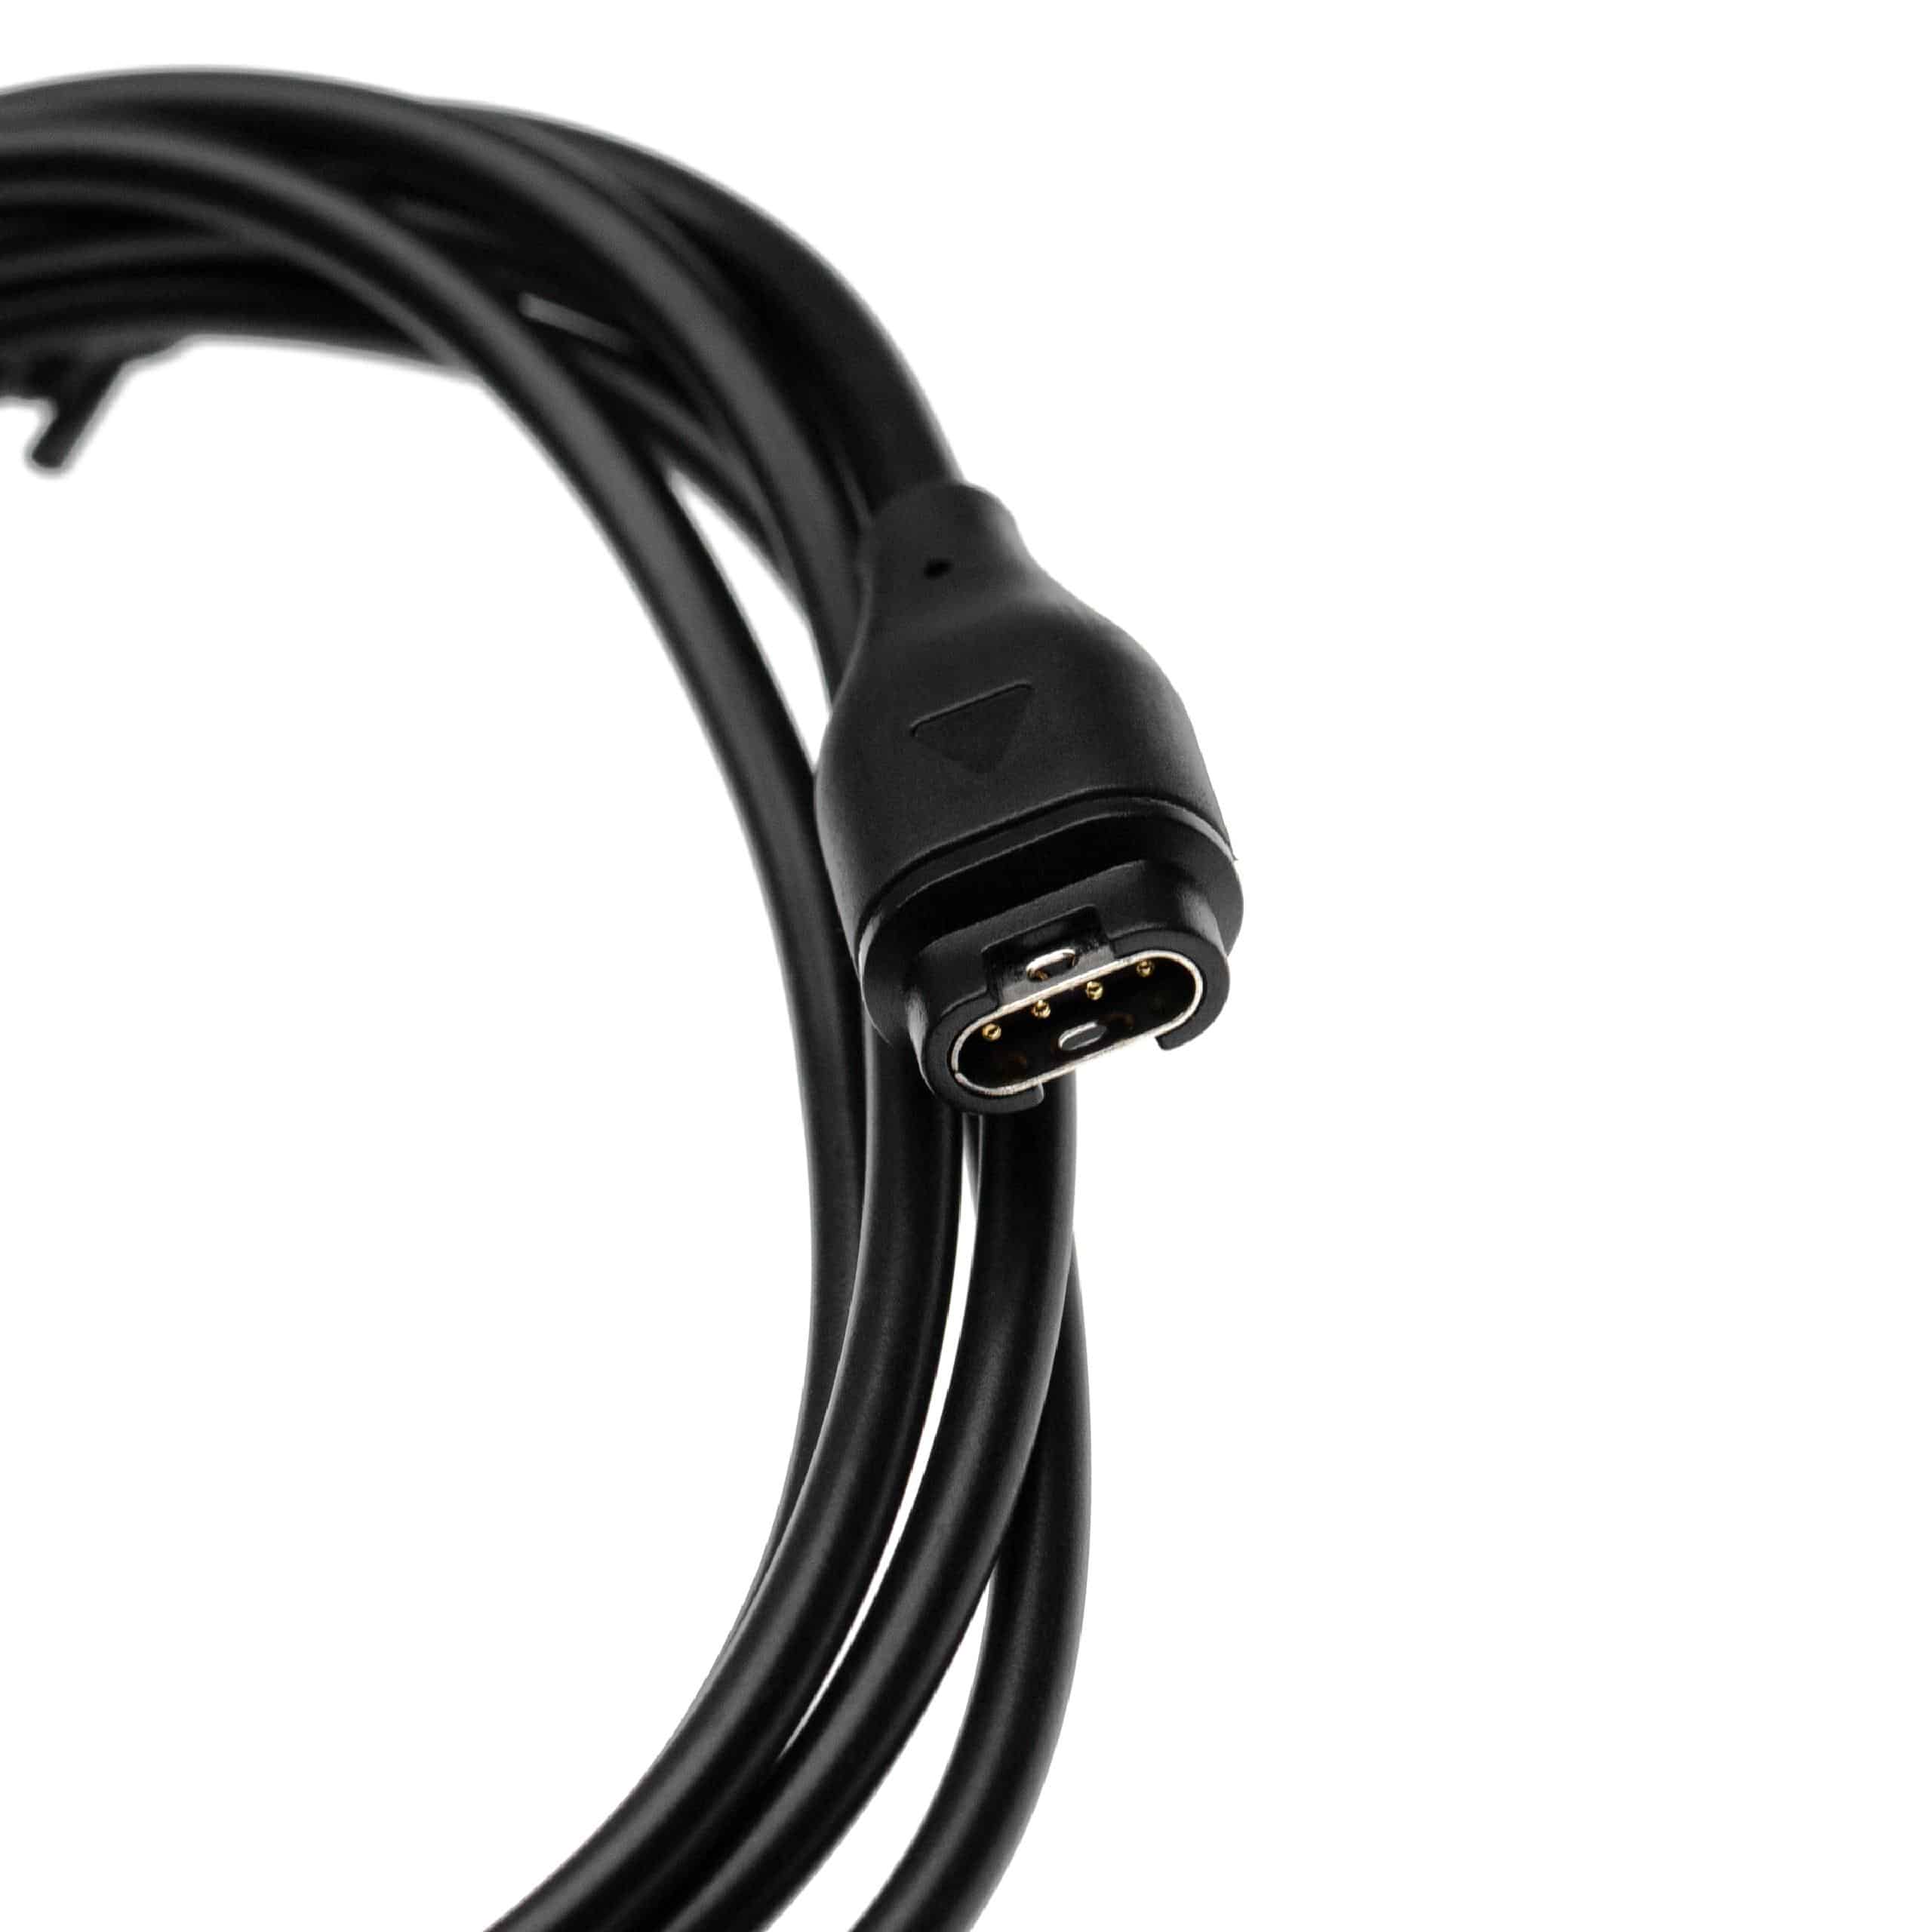 Charging Cable suitable for 3 Garmin Vivoactive 3 Fitness Tracker - Micro USB Cable, 100cm, black